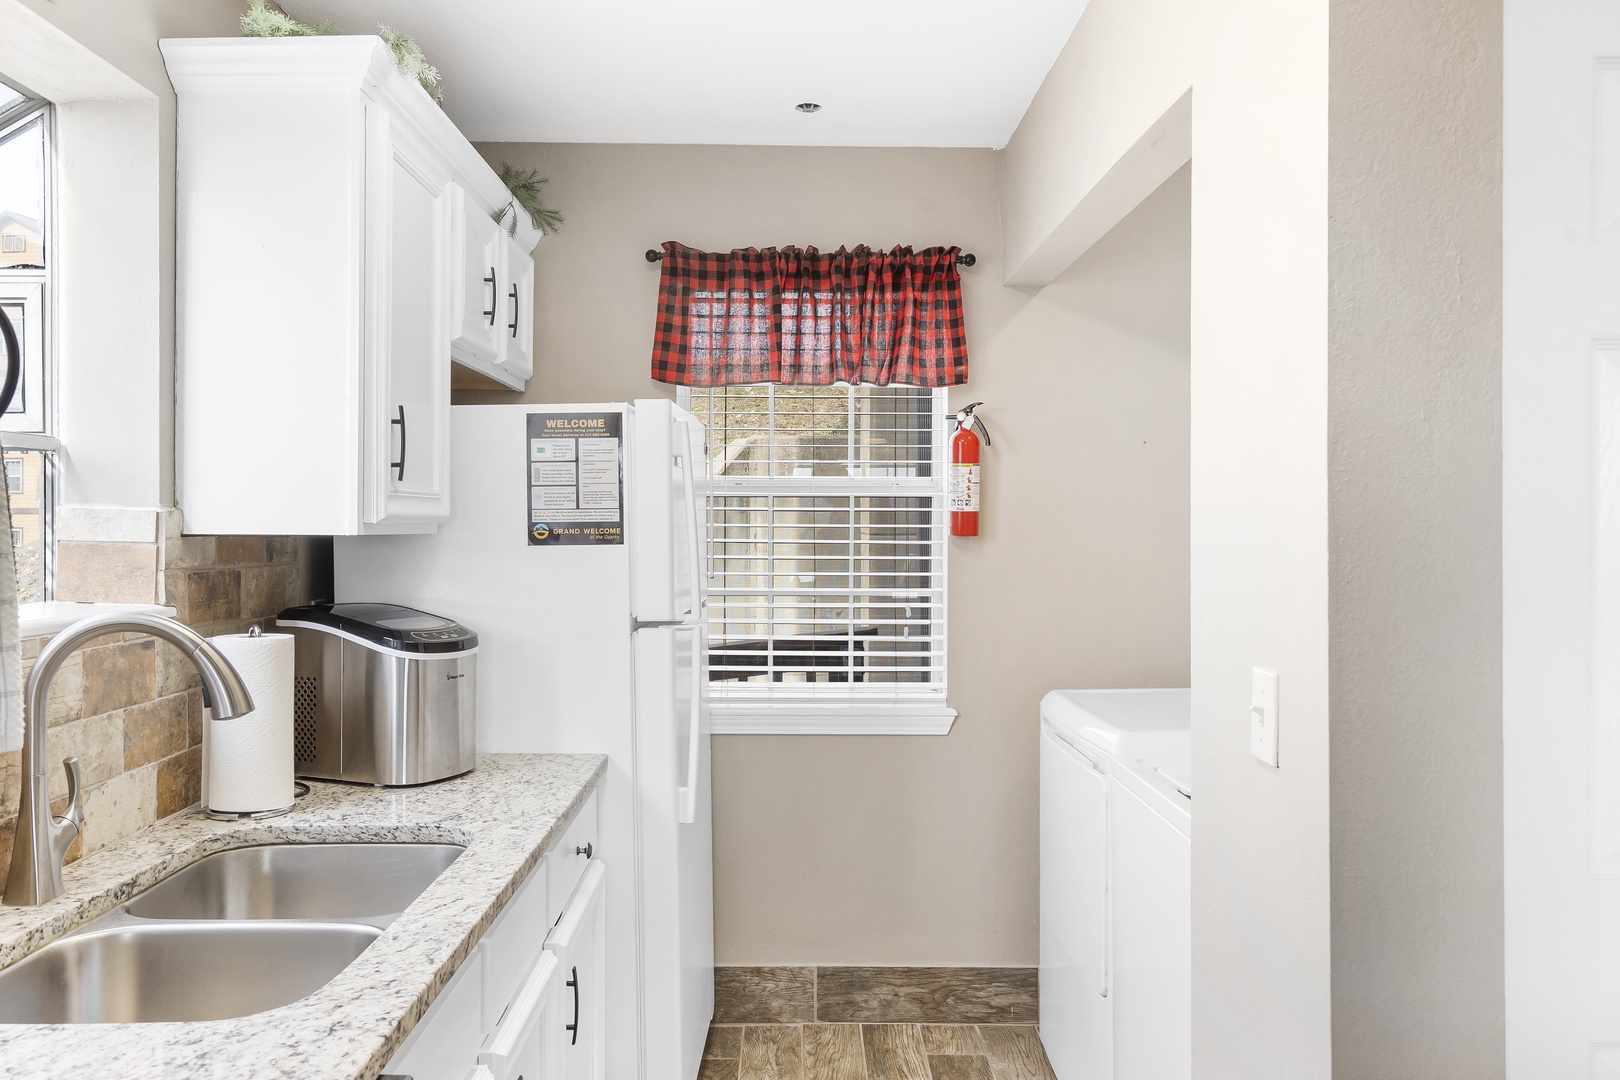 The cheerful kitchen offers ample space & all the comforts of home